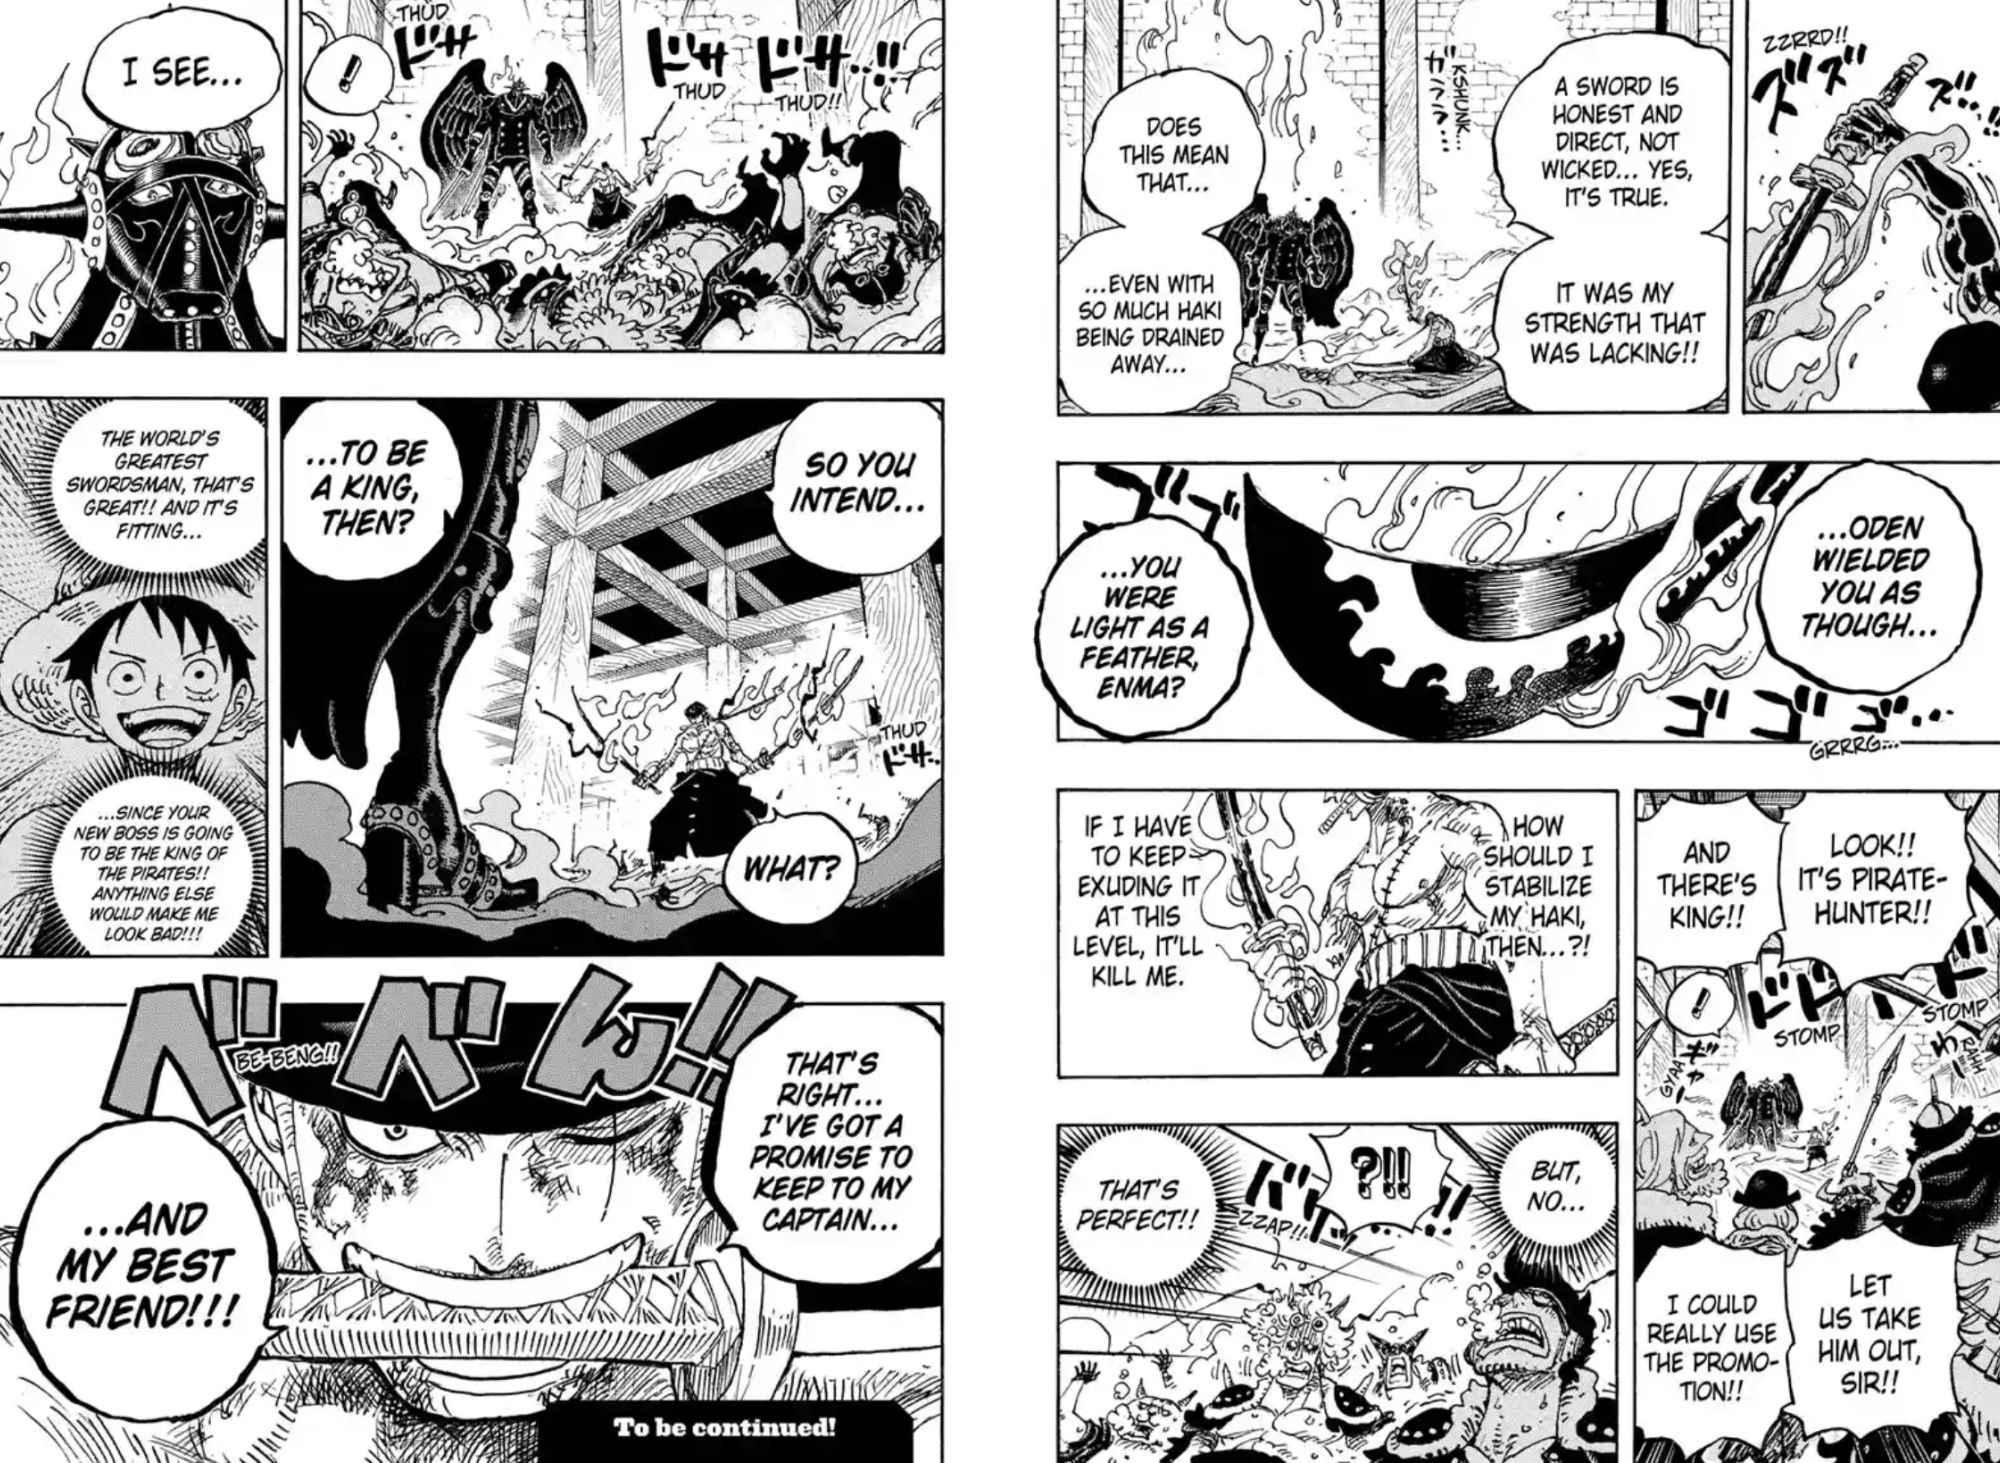 Zoro tells King about his promise to Luffy